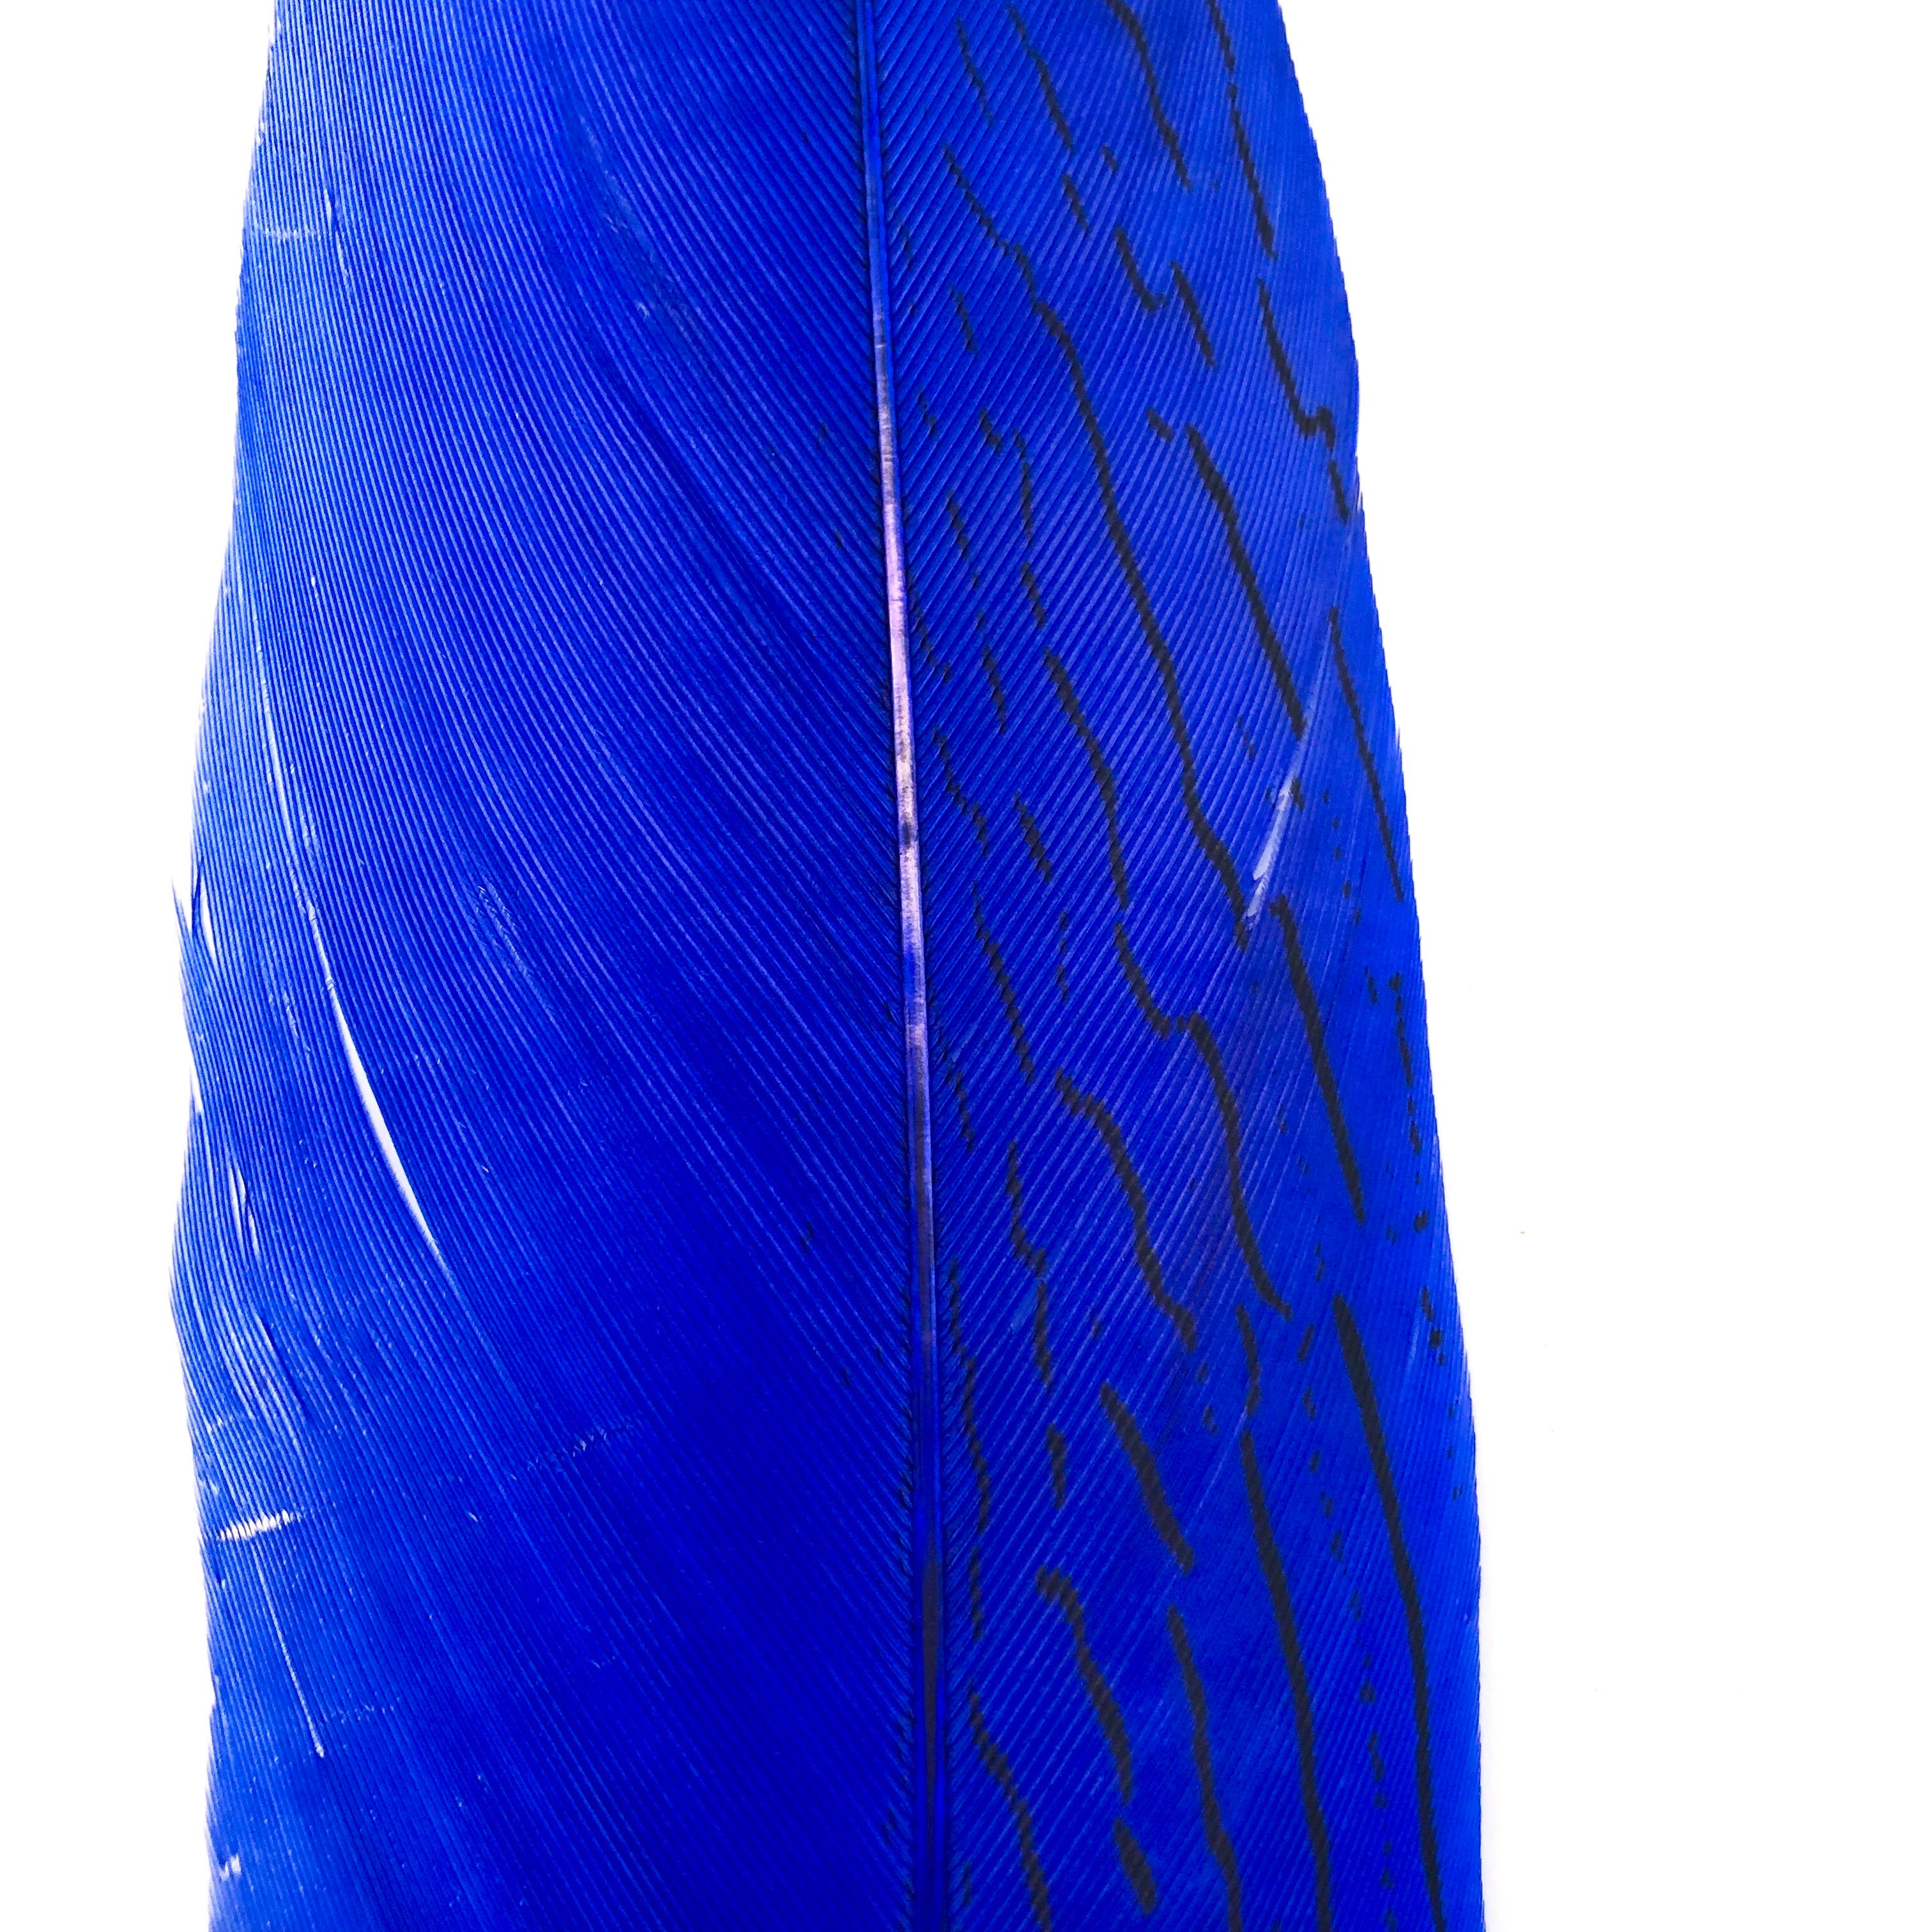 6" to 10" Silver Pheasant Tail Feather - Royal Blue